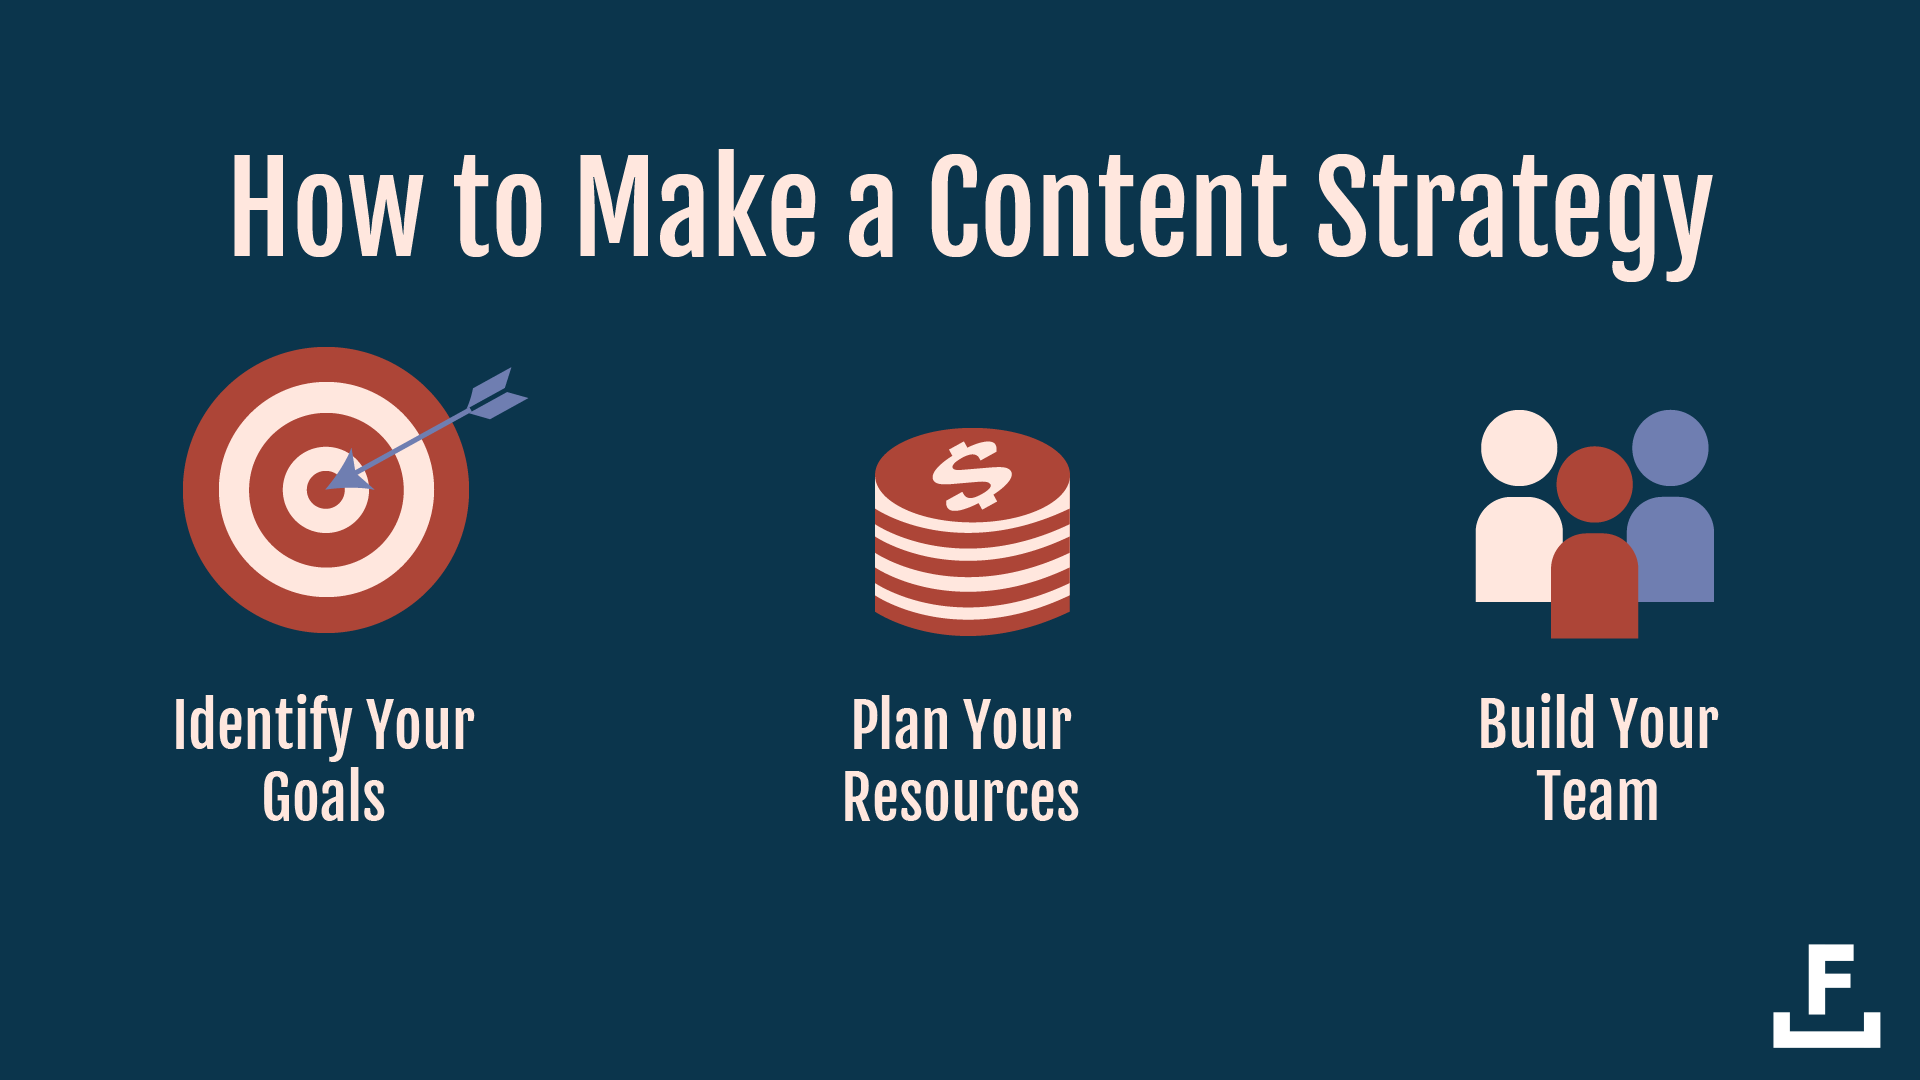 List of steps in content strategy planning